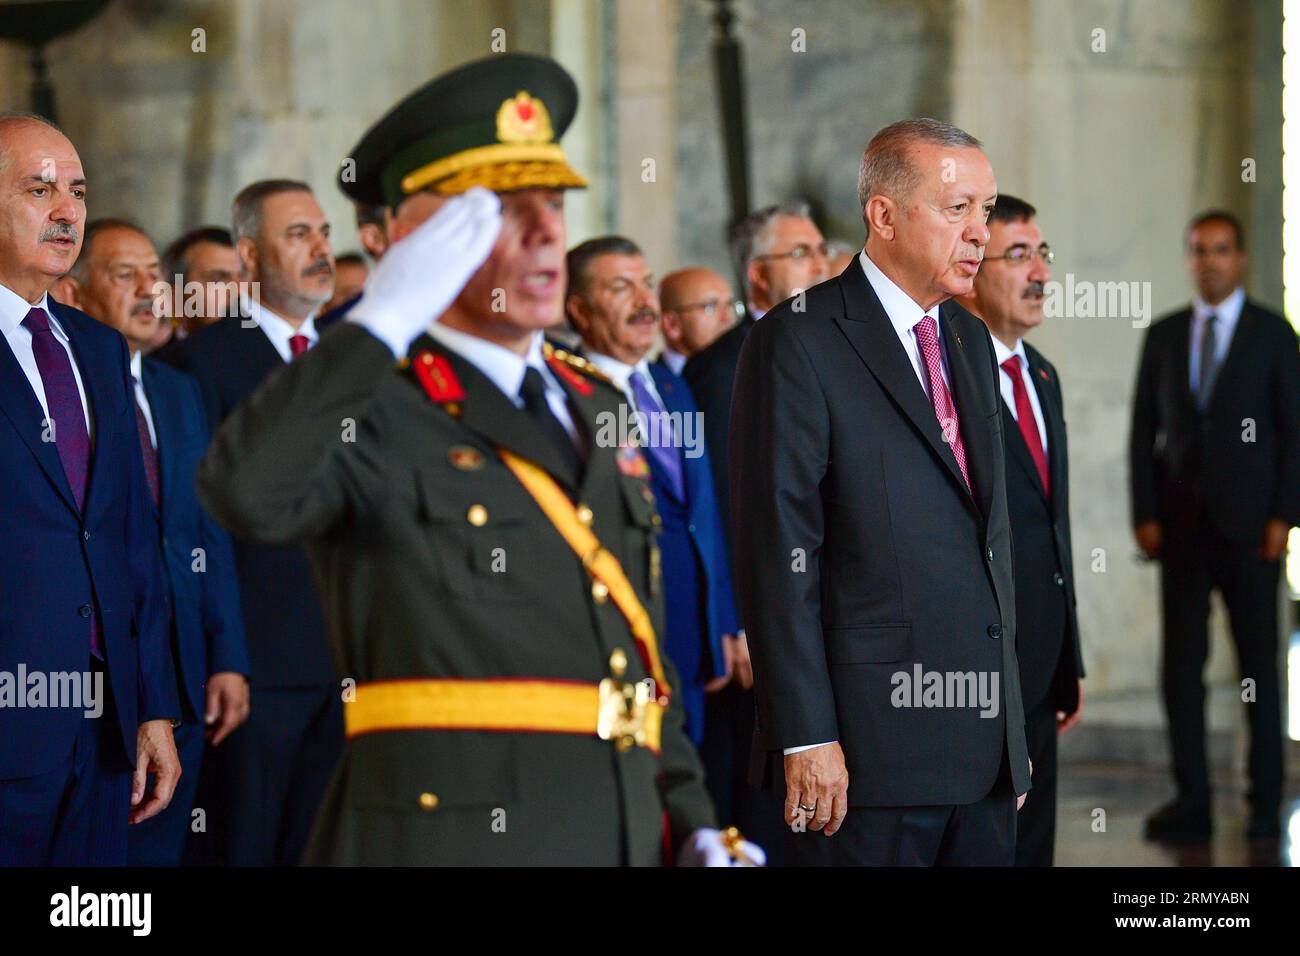 President of the Republic of Turkey, Recep Tayyip Erdogan, seen inside the mausoleum of the country's founder, Mustafa Kemal Ataturk. Victory Day is an official and national holiday celebrated on August 30 every year in Turkey and the Turkish Republic of Northern Cyprus to commemorate the Great Offensive, which ended in victory under Ataturk's command in Dumlupnar on August 30, 1922. On the 101th anniversary of the victory, President of the Republic of Turkey Recep Tayyip Erdo?an visited the mausoleum of the country's founder, Mustafa Kemal Atatürk. Stock Photo